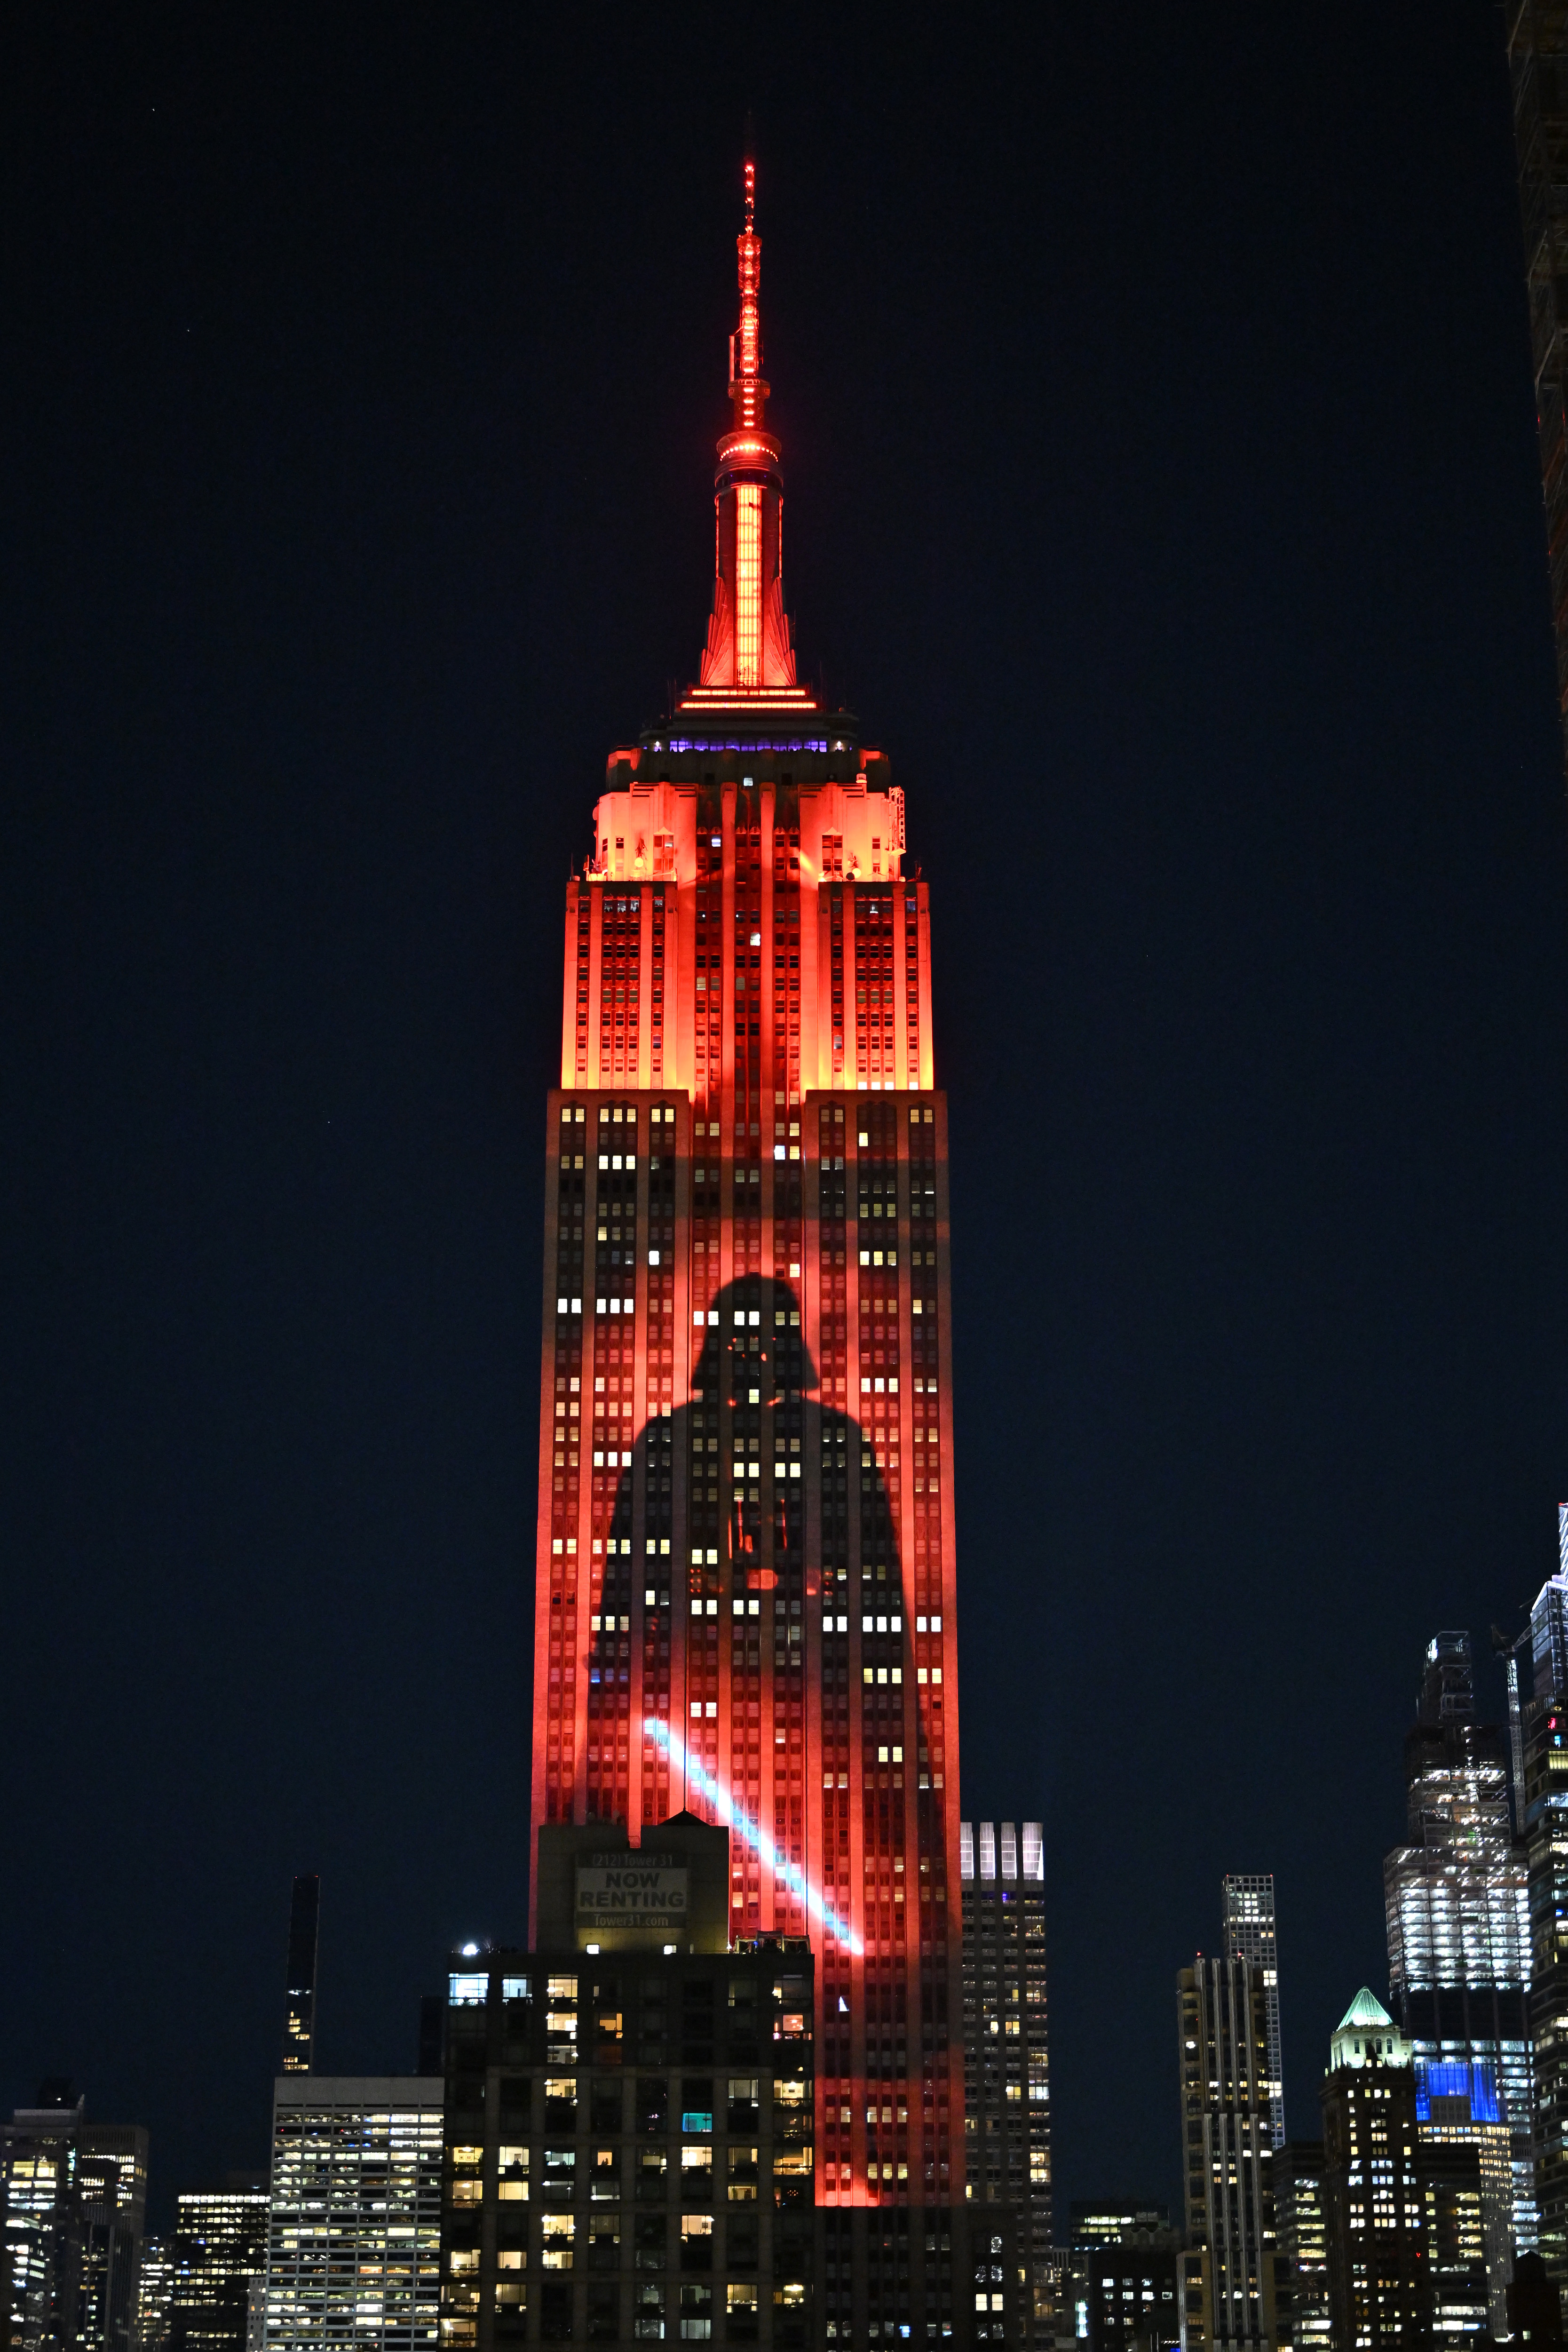 star wars projection onto ESB